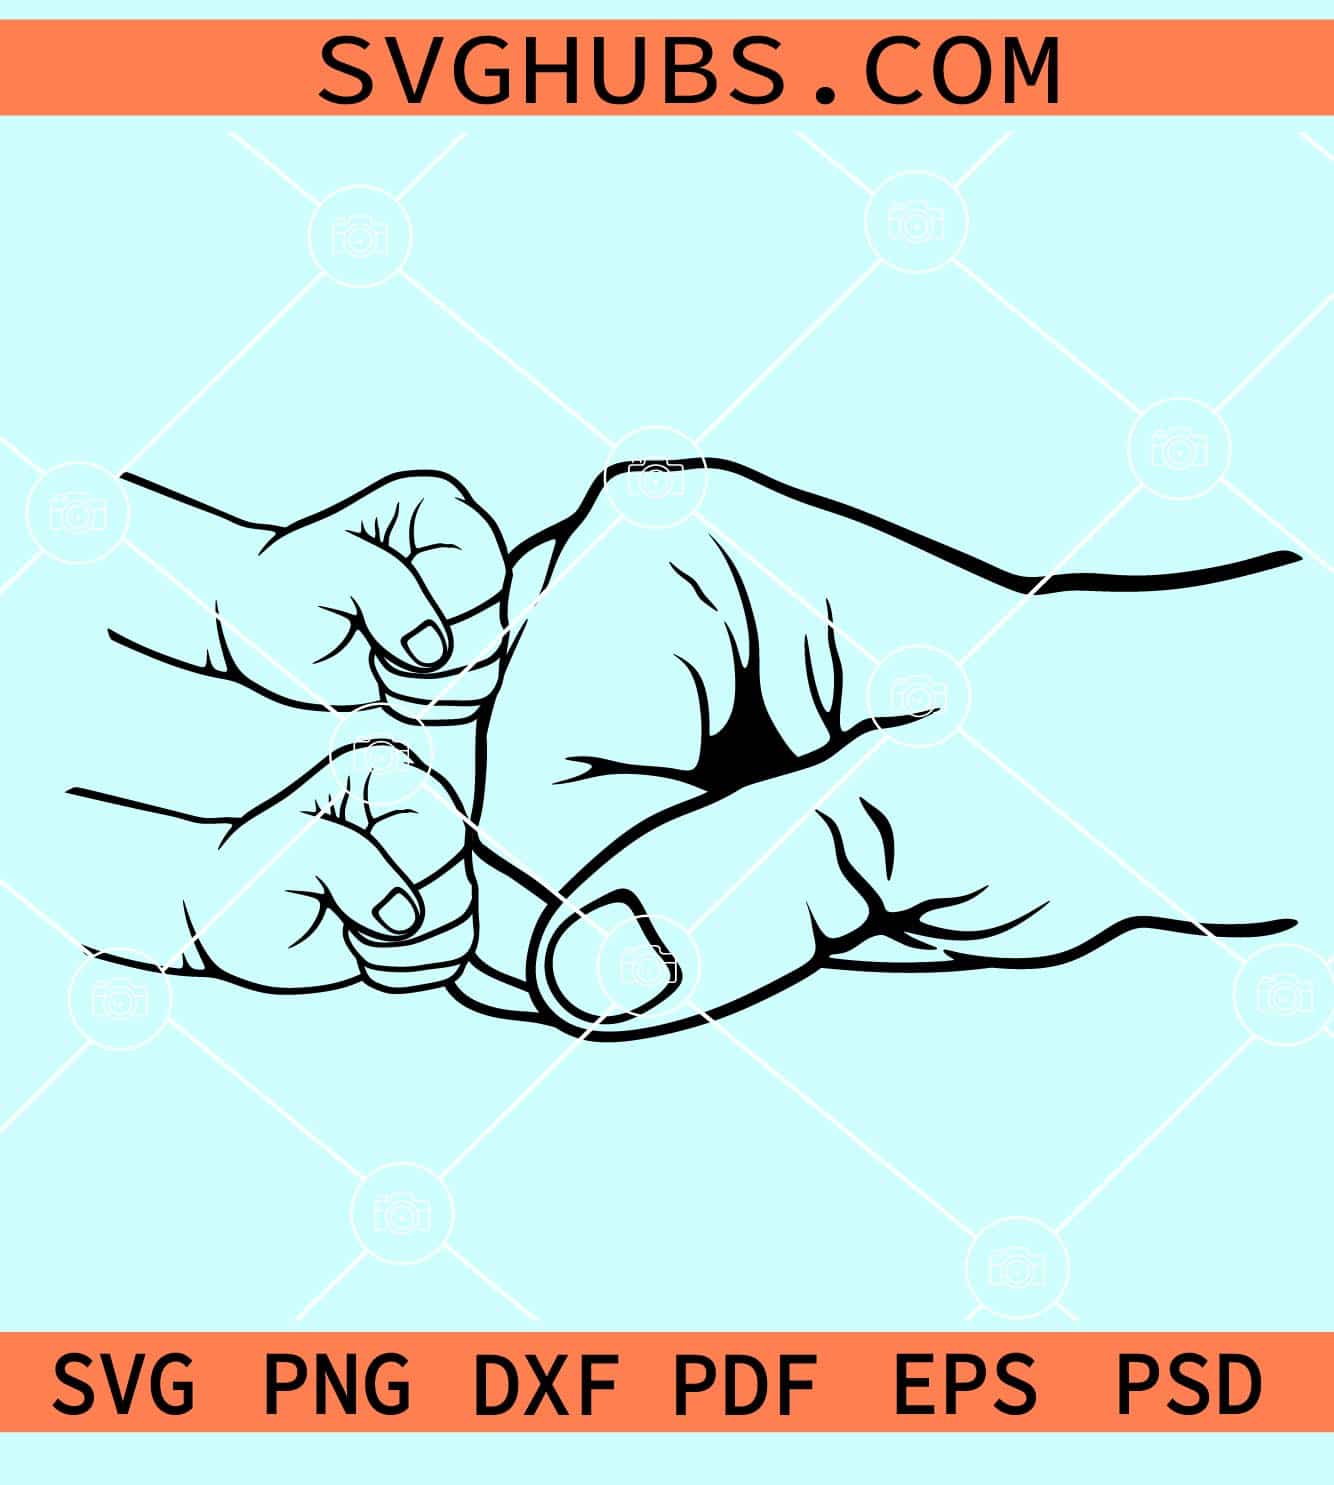 Fist bump Fathers day svg, Fist bump svg, Father and Sons Svg, Best